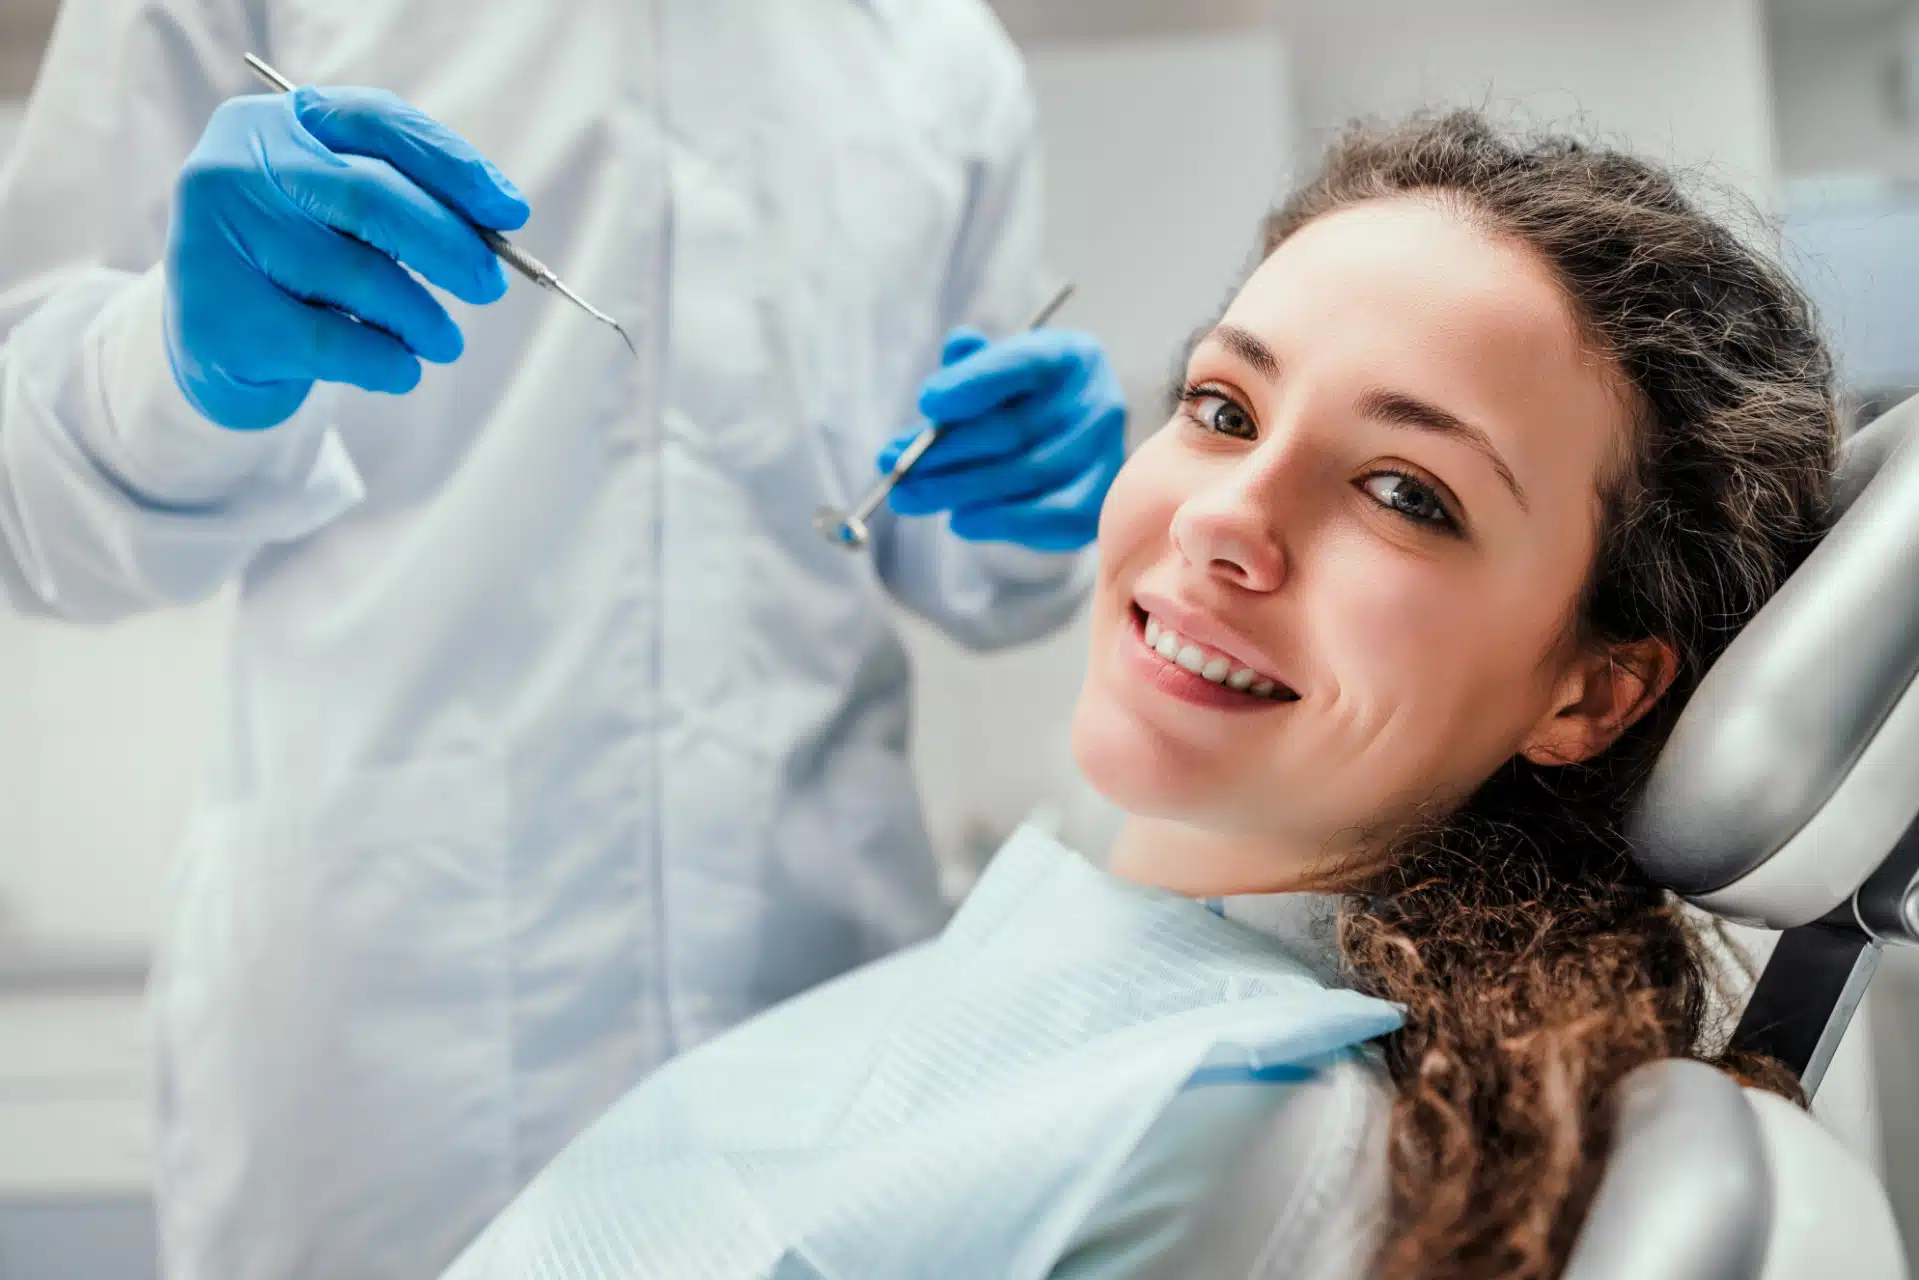 We offer a variety of sedation options to help you relax during dental appointments.